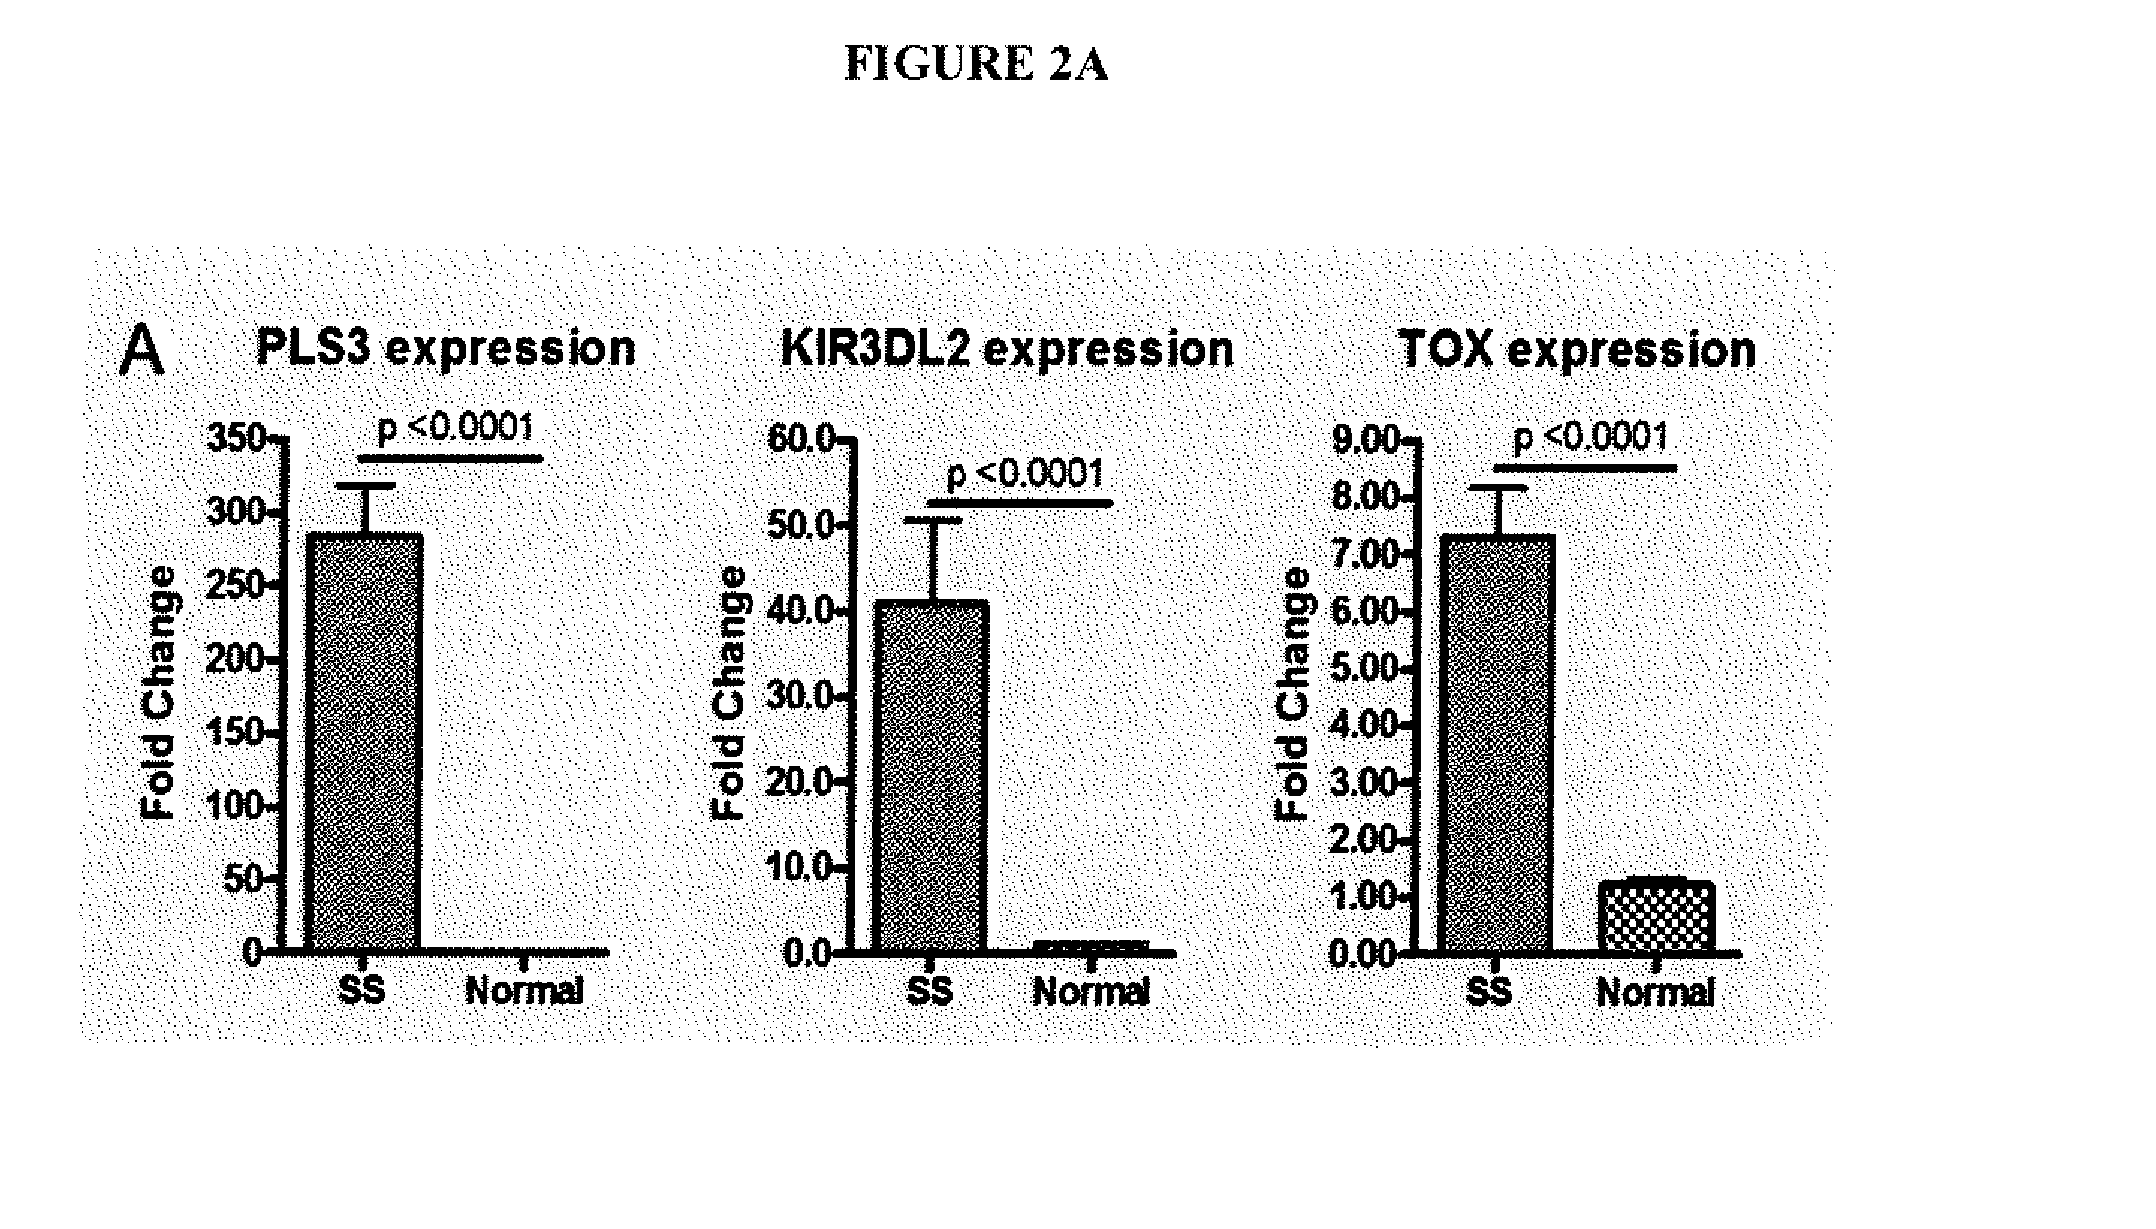 Method for diagnosis, prognosis and determination of treatment for cutaneous t-cell lymphoma